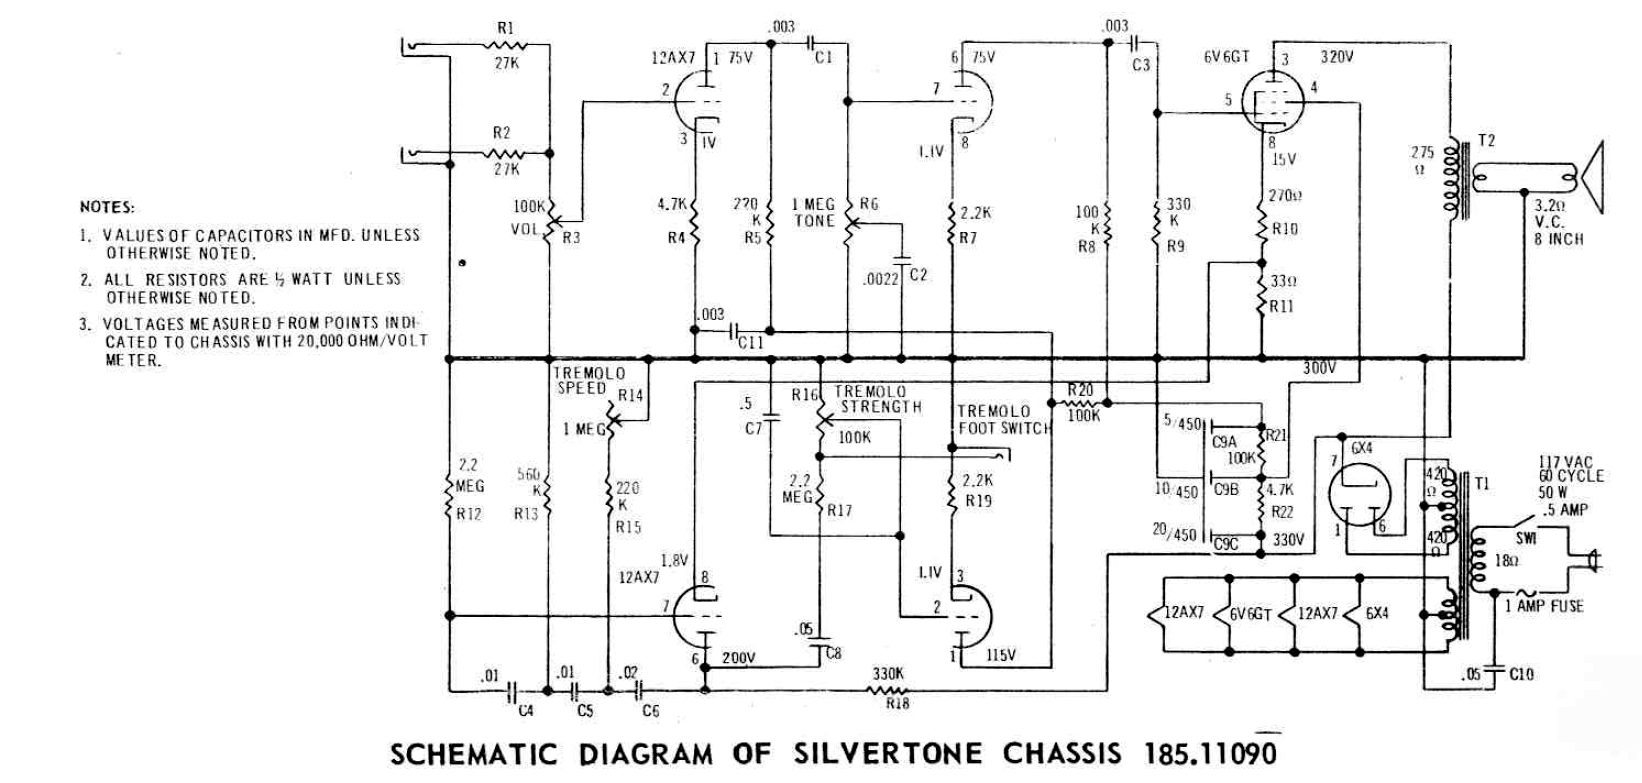 hMJEPb-Silvertone-1449-1457-Schematic.png